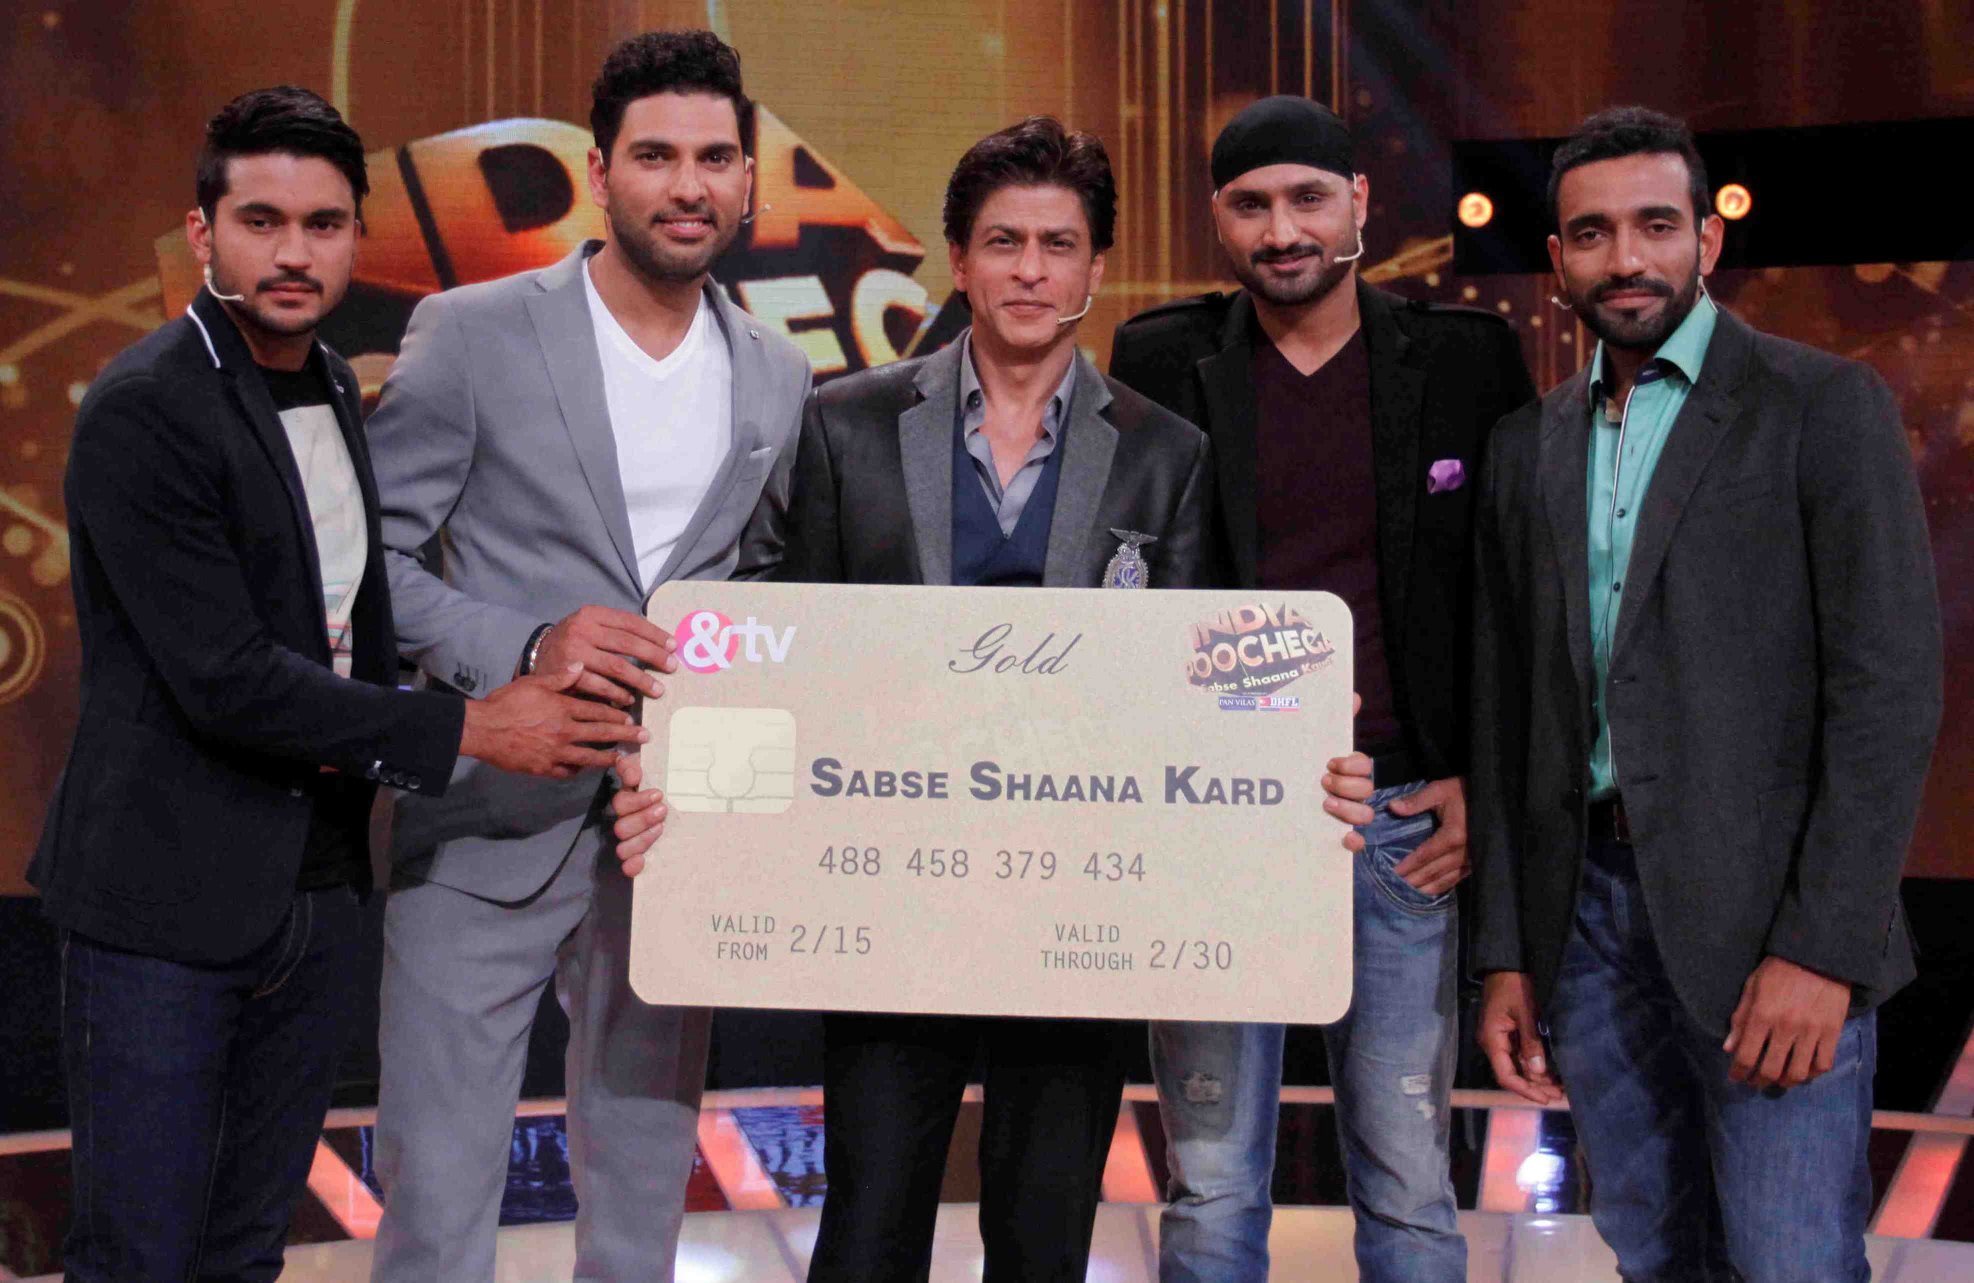 When SRK got 'auctioned' on TV show